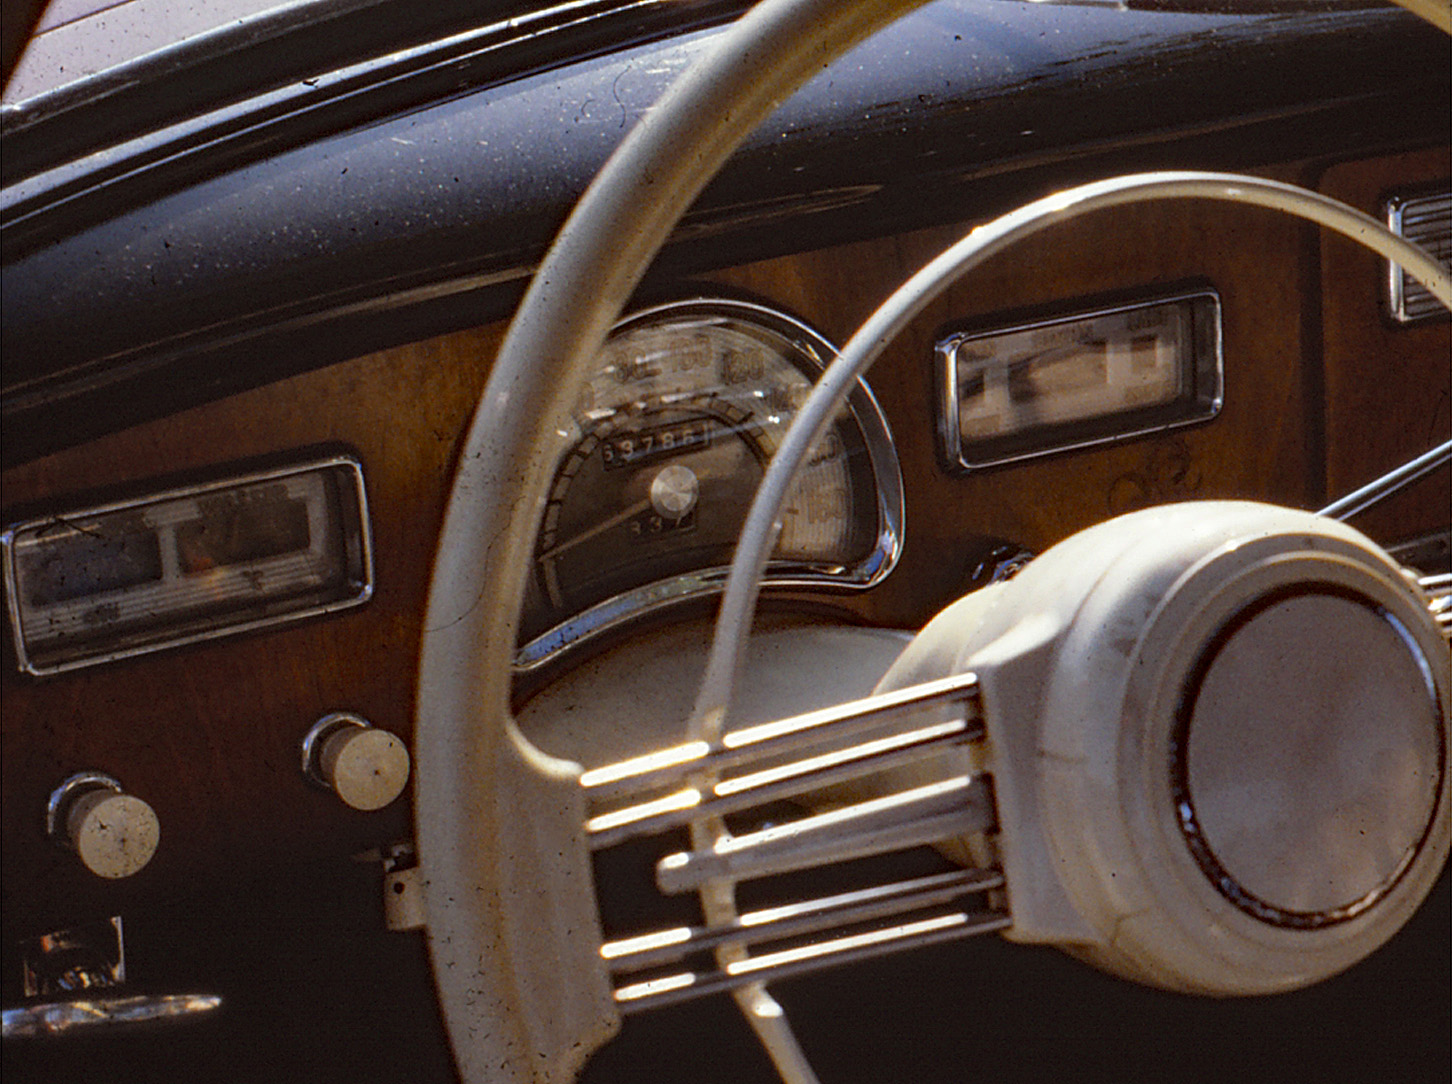 BMW 502 steering wheel and dash